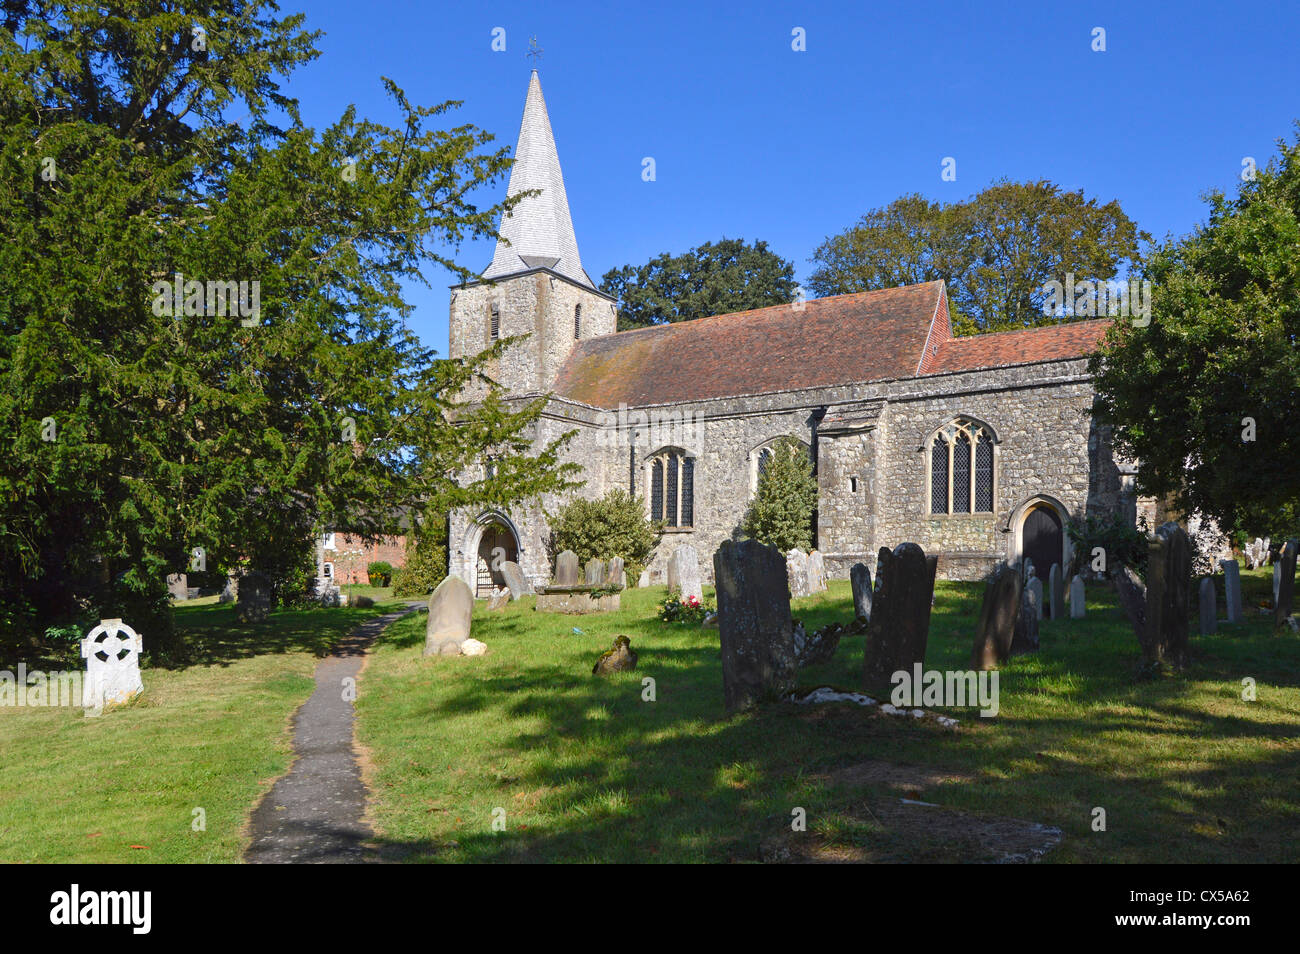 Saint Nicholas parish church and graveyard in the village of Pluckley and featured in TV series The Darling Buds of May Stock Photo